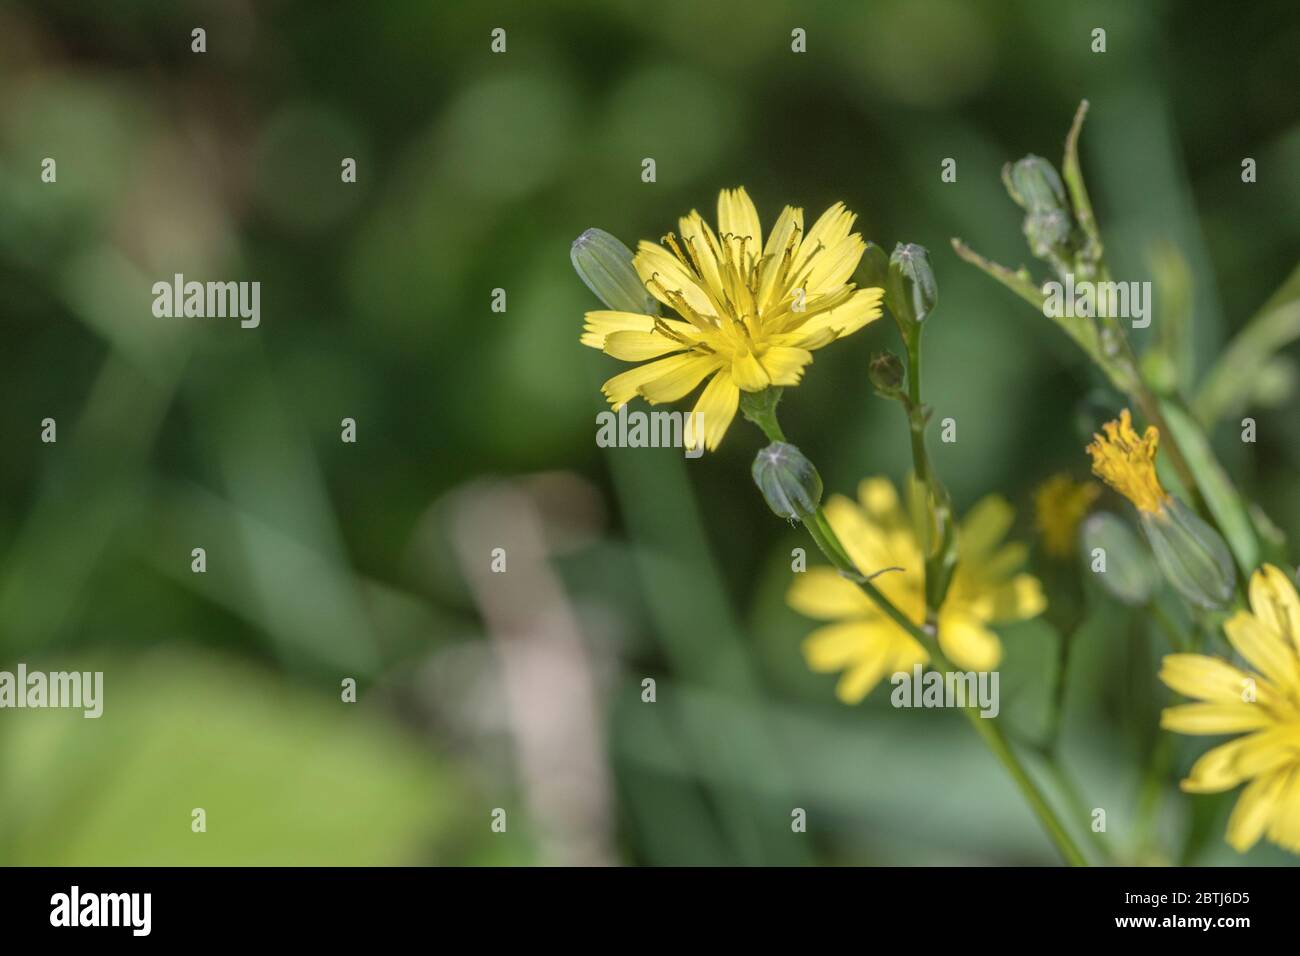 Macro close up shot of flowers and flower buds of Nipplewort / Lapsana communis in late May. Formerly a medicinal plant used in herbal remedies. Stock Photo